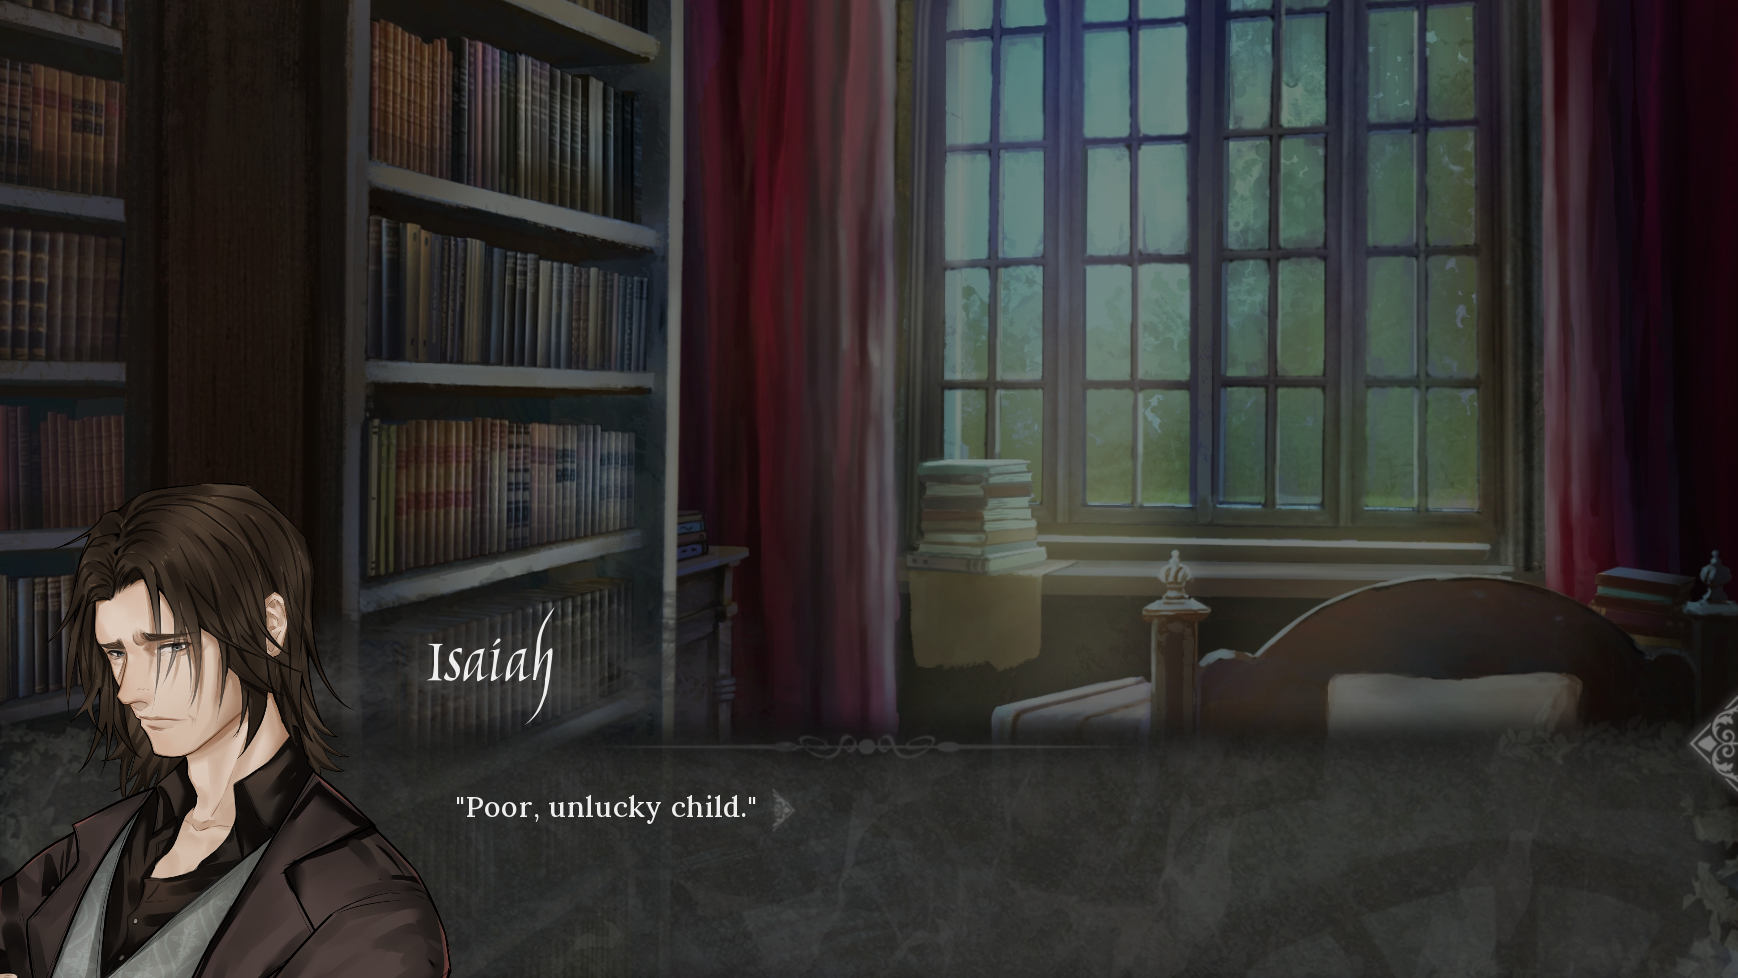 Isaiah in the study. Isaiah: Poor, unlucky child.